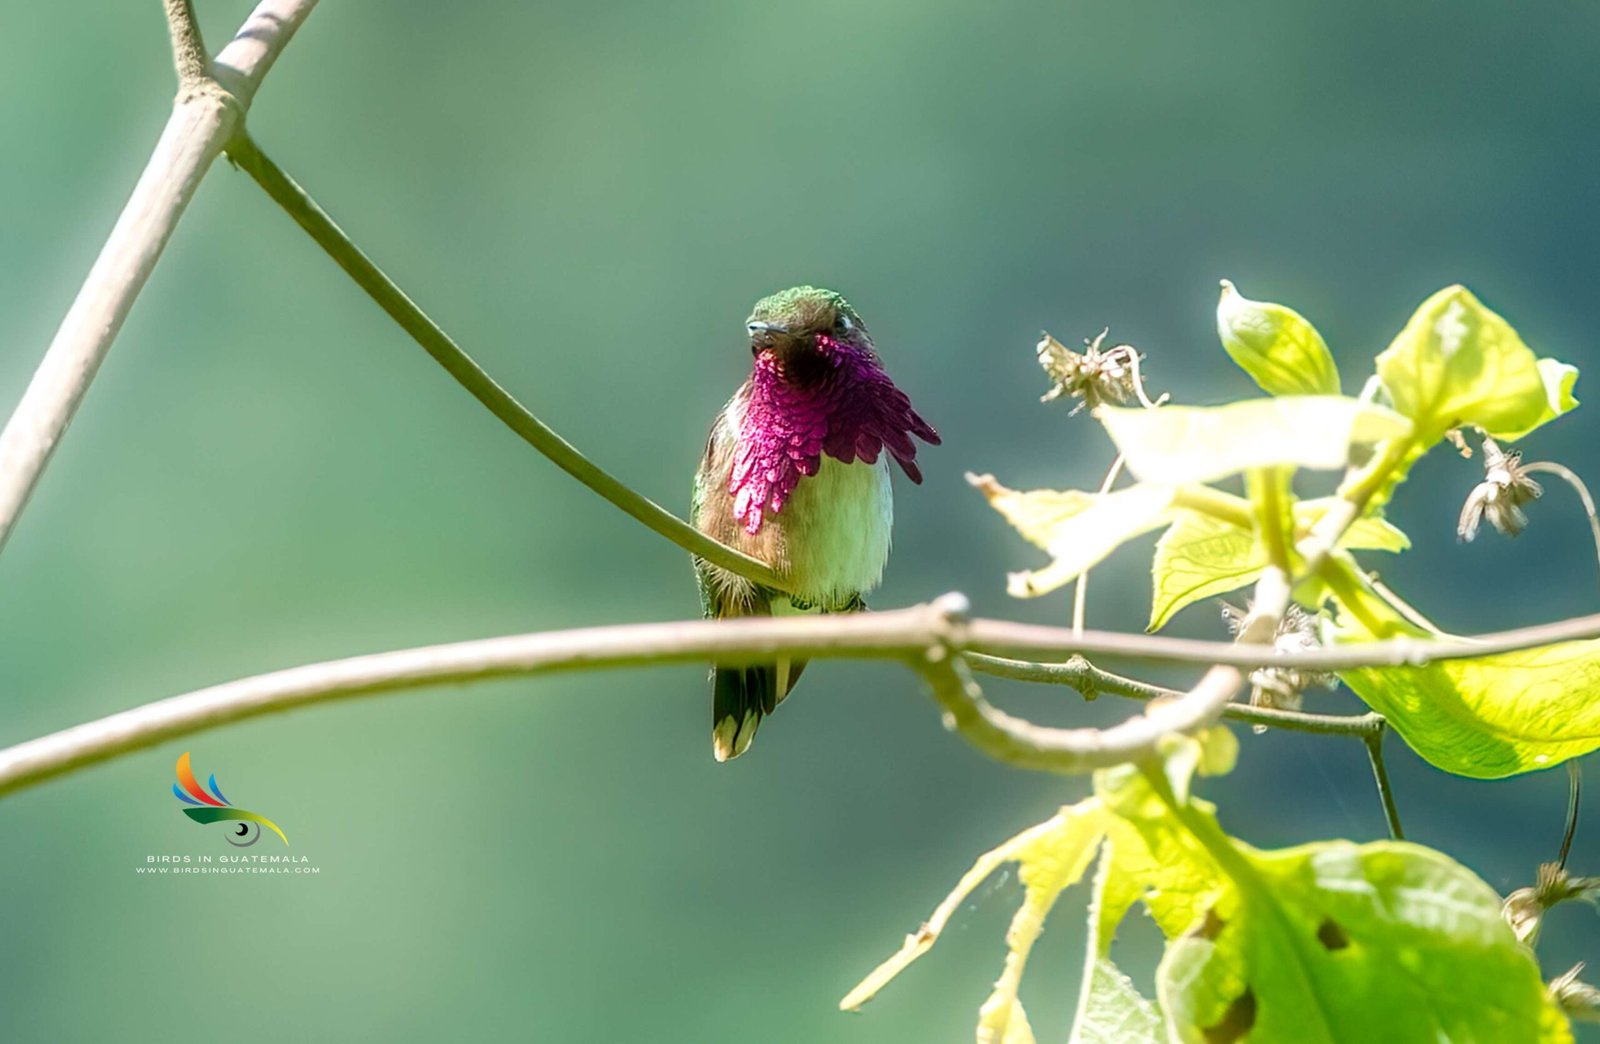 A Wine-Throated Hummingbird perched gracefully on a tree branch, framed by lush green leaves